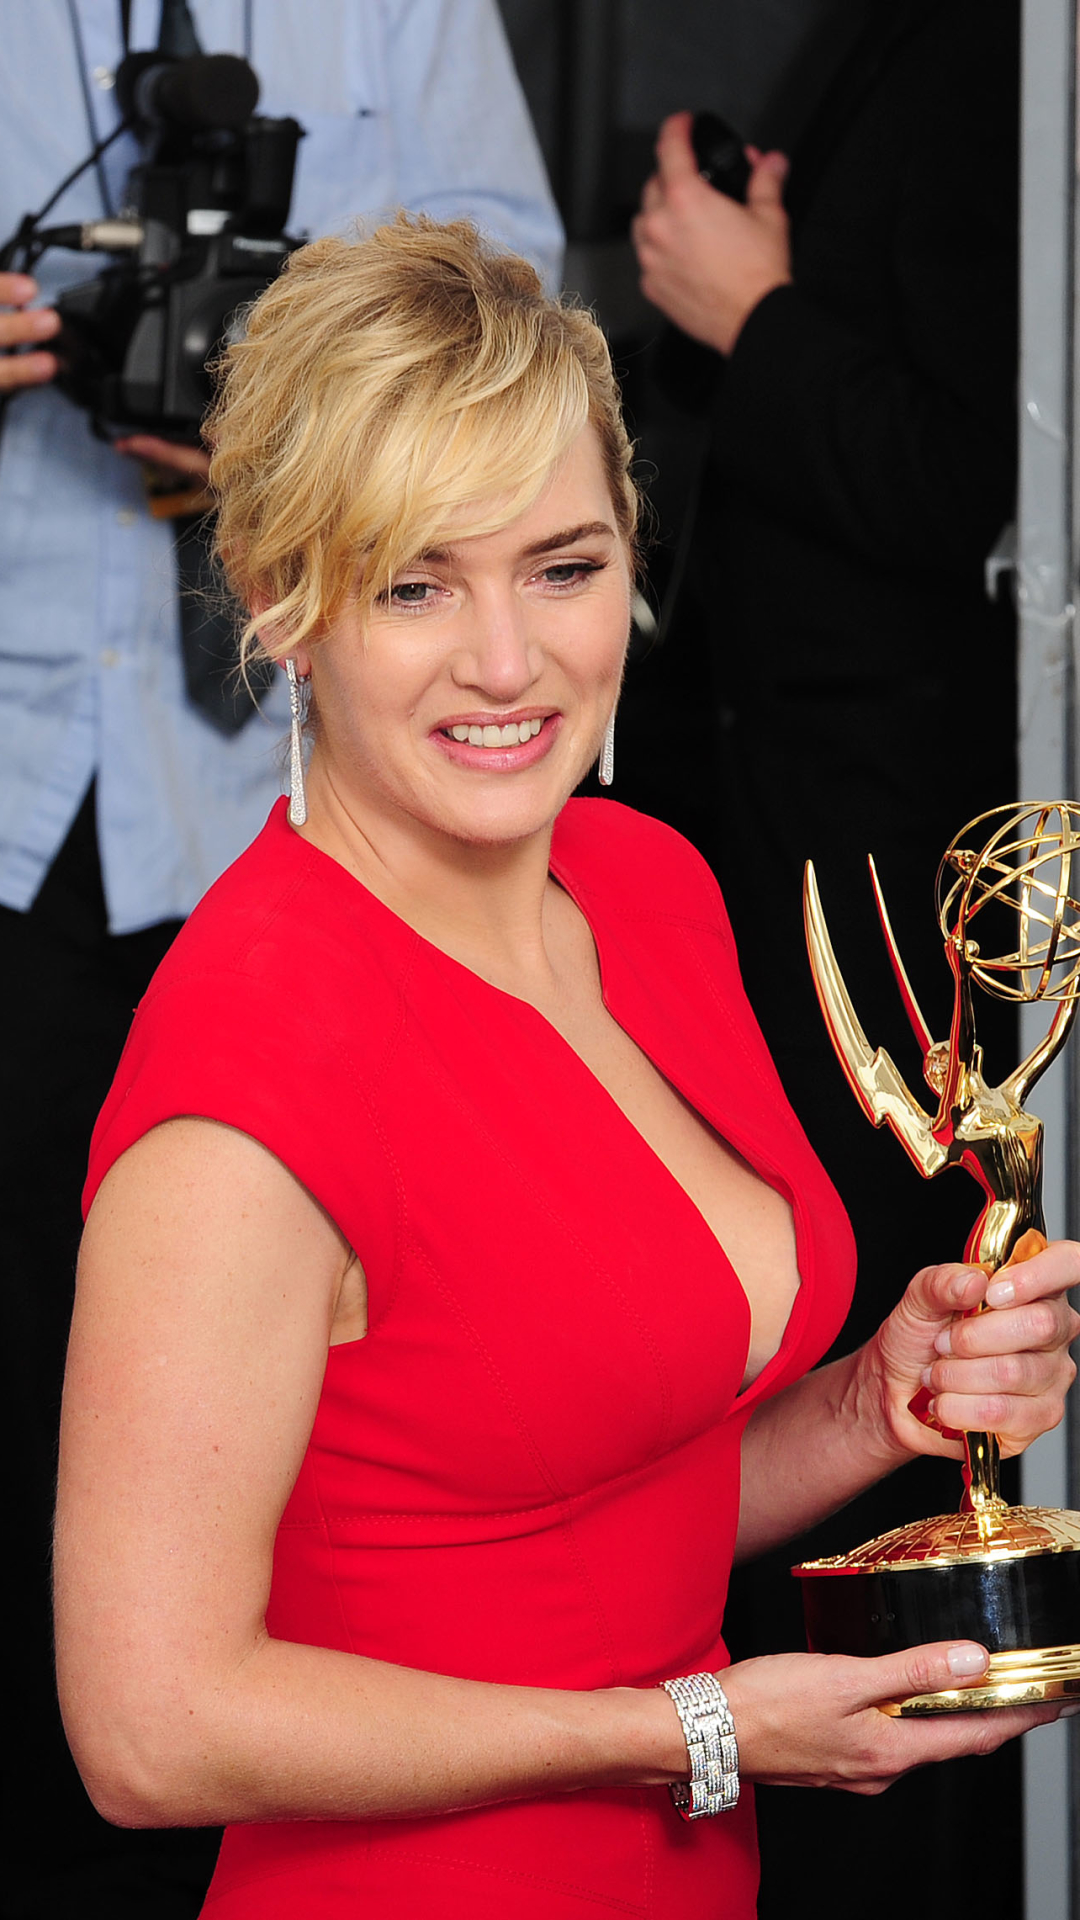 Hd Wallpapers Of Mobile Of Kate Winslet - 1080x1920 Wallpaper 